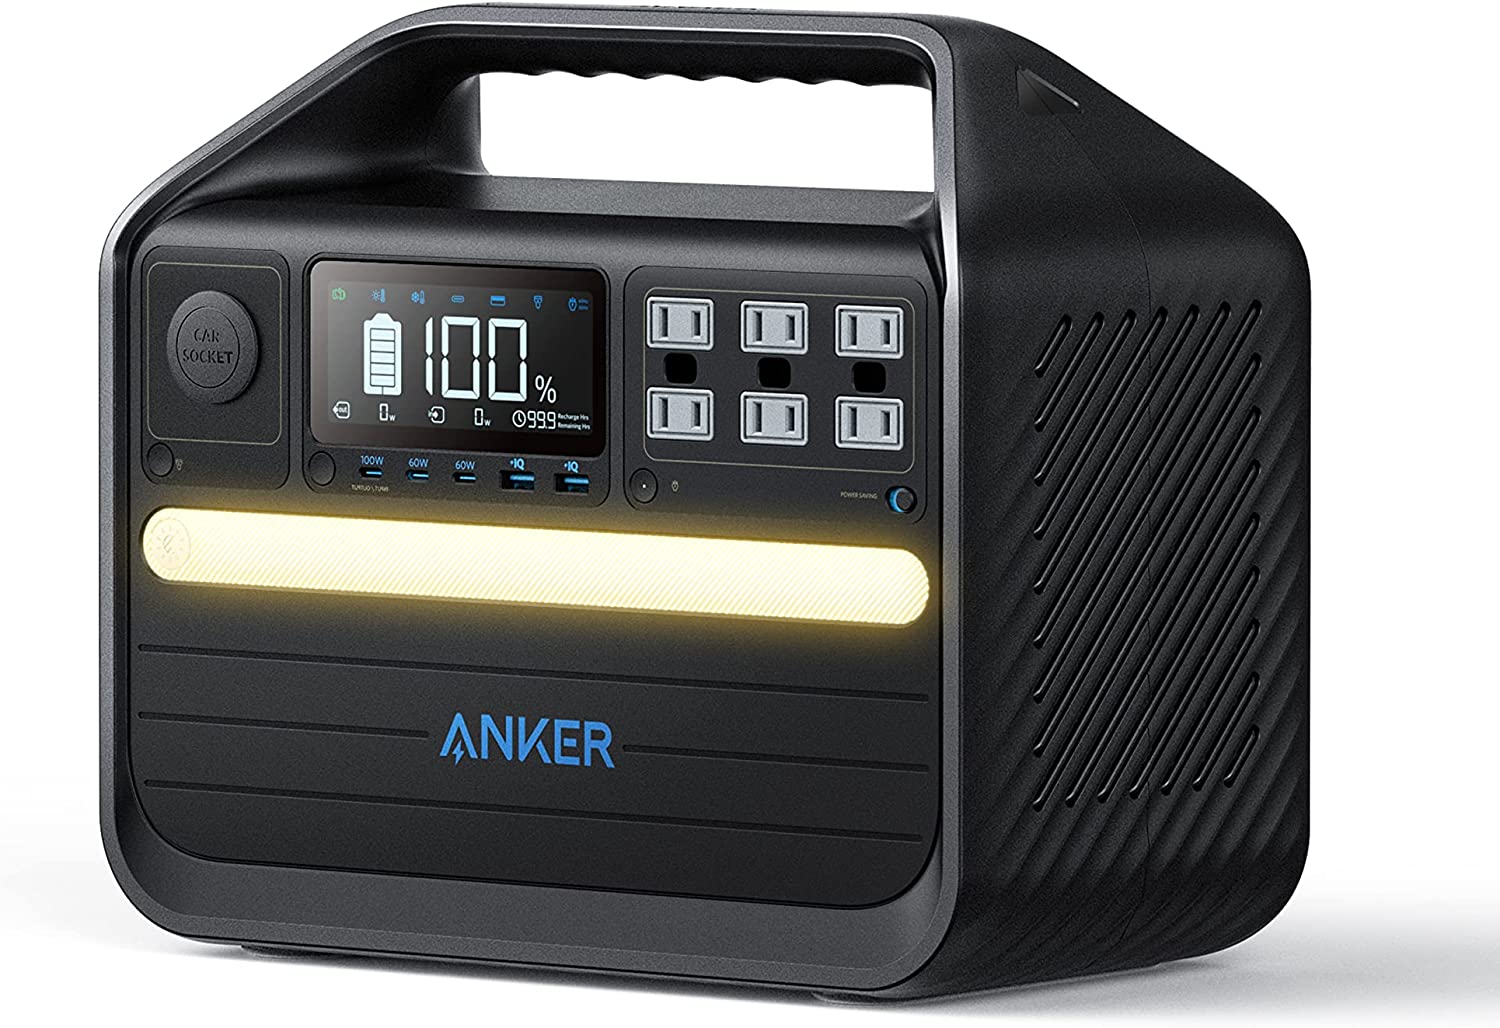 Anker 555 Portable Power Station, 1024Wh Solar Generator (Solar Panel Optional) with LiFePO4 Battery, 6 AC Outlets, 3 USB-C PD Ports at 100W Max, 1000W Powerhouse for Outdoor RV, Camping, Emergency